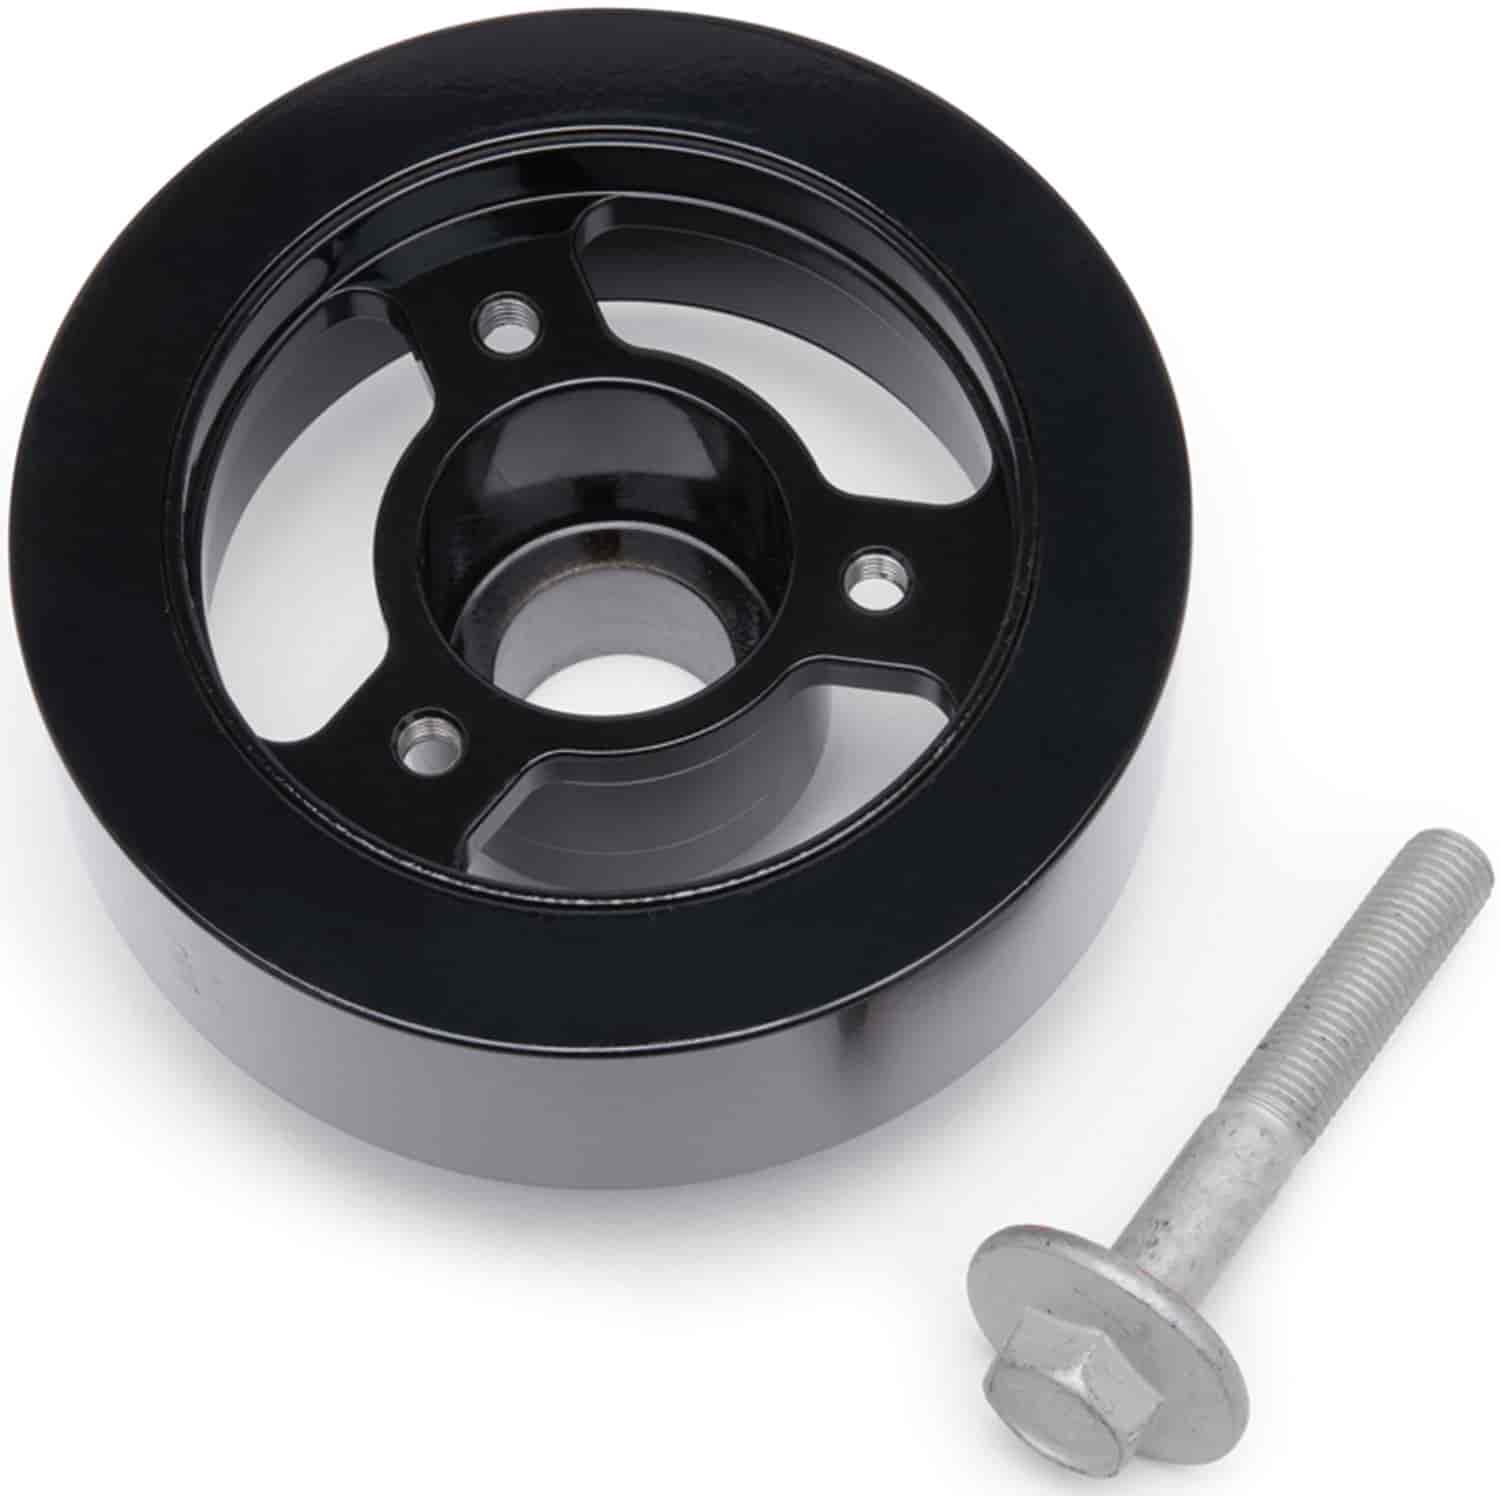 E-Force Replacement Harmonic Damper for Wet Sump C7